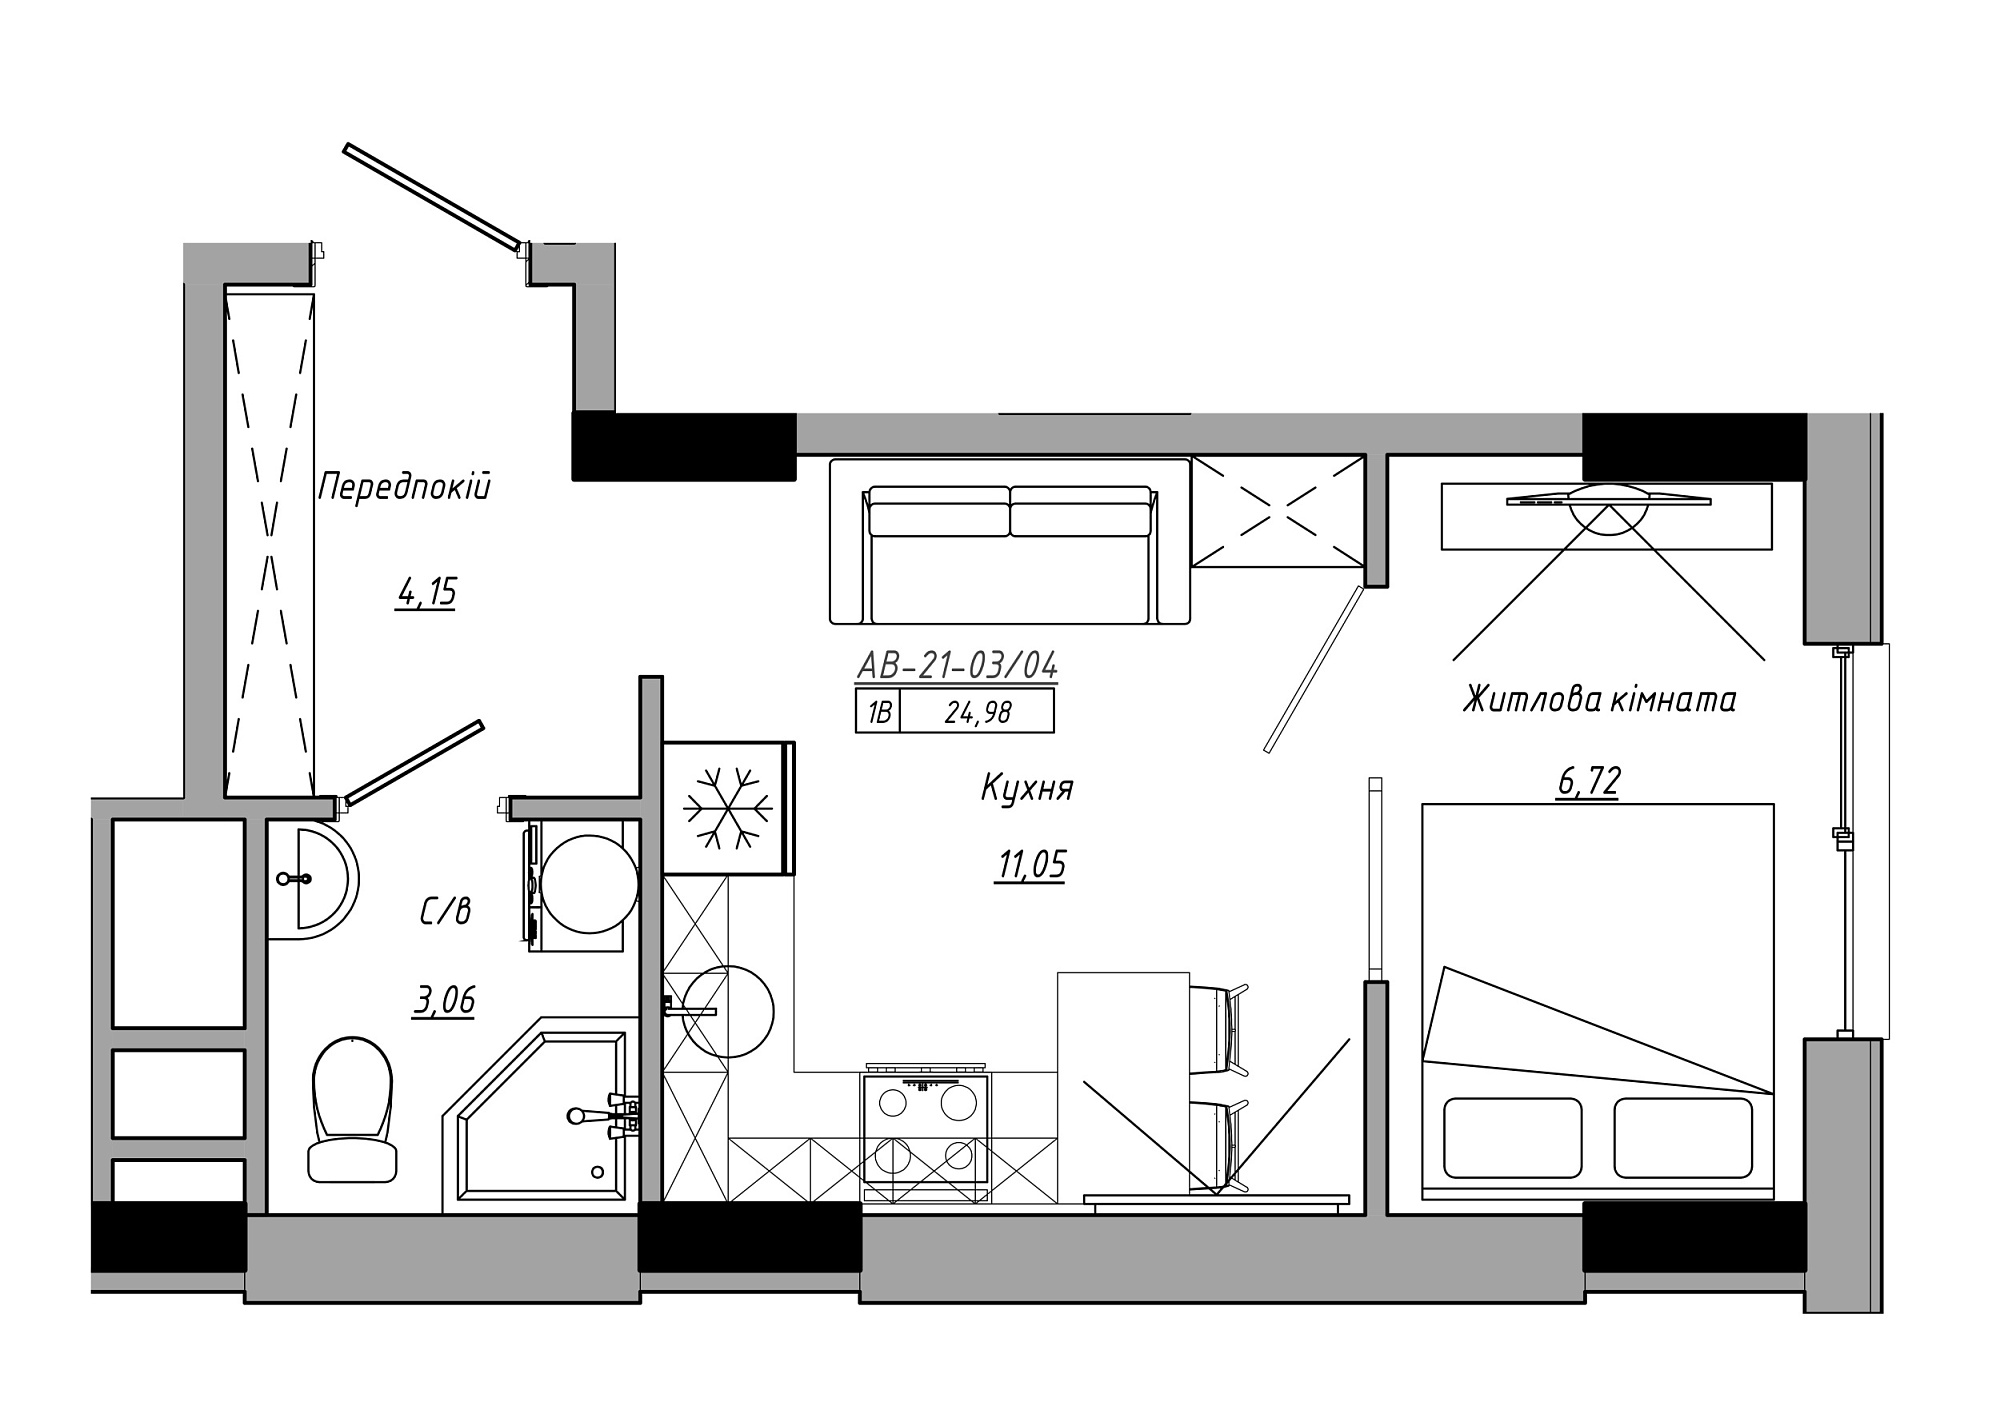 Planning 1-rm flats area 24.98m2, AB-21-03/00004.